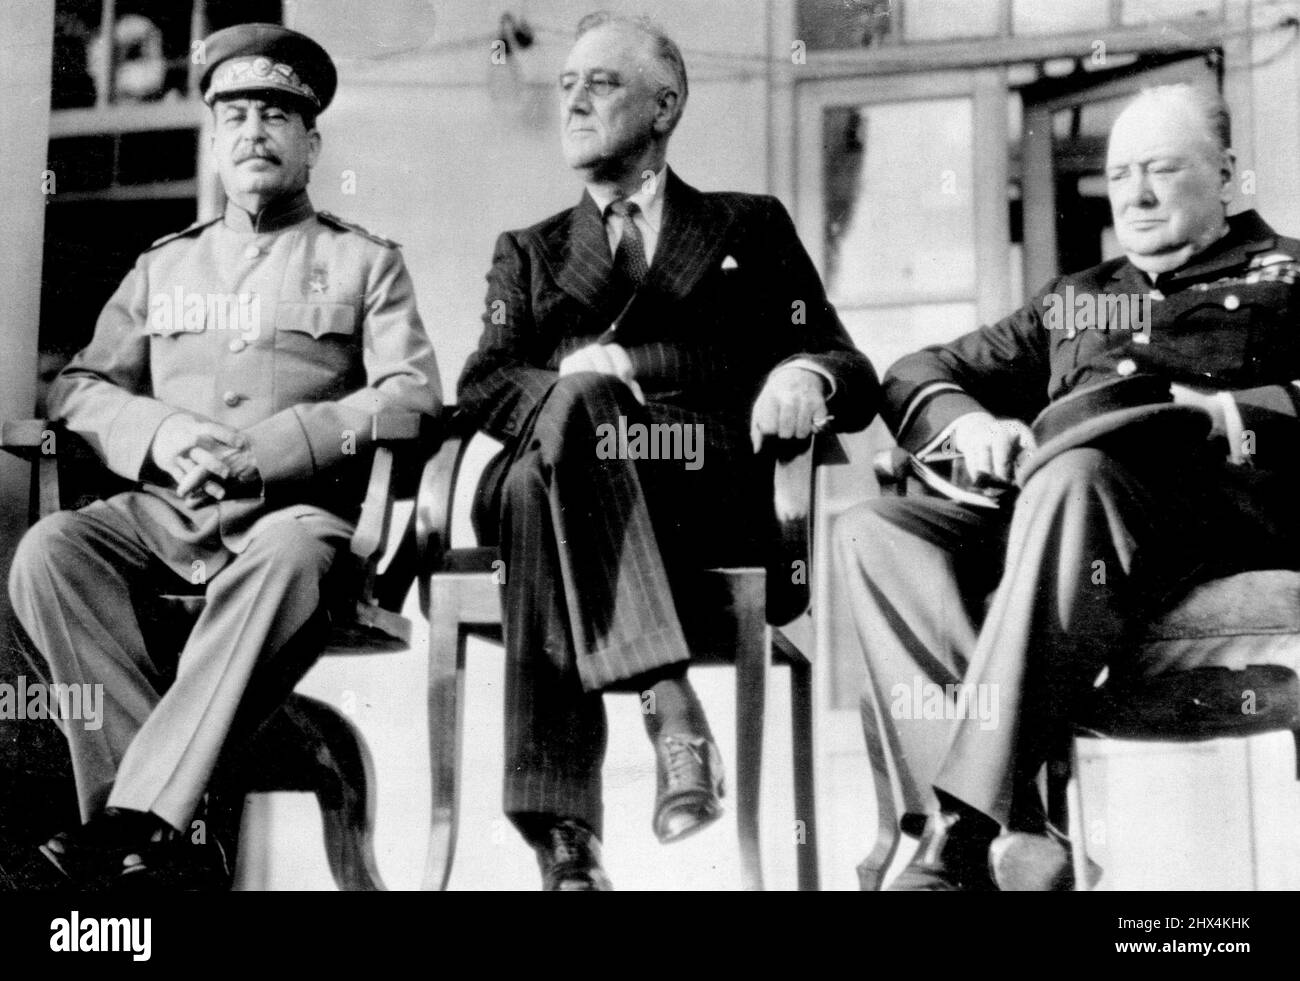 Principals At Teheran Conference -- Joseph Stalin, Russian premier (left), sits with President Franklin D. Roosevelt of the United States and Prime Minister Winston Churchill (right), on the porch of the Russian Embassy at Teheran, Iran, during their four-day conference at which they drew plans to concentrate the total military might of Russia, United States and Britain on a 'Relentlessly Increasing' Basis Guaranteeing victory over Germany. This is one of a series of photos on the conference made by U.S. Army 12th Air Forces photographers and pleased by the War Department in Washington. Decemb Stock Photo